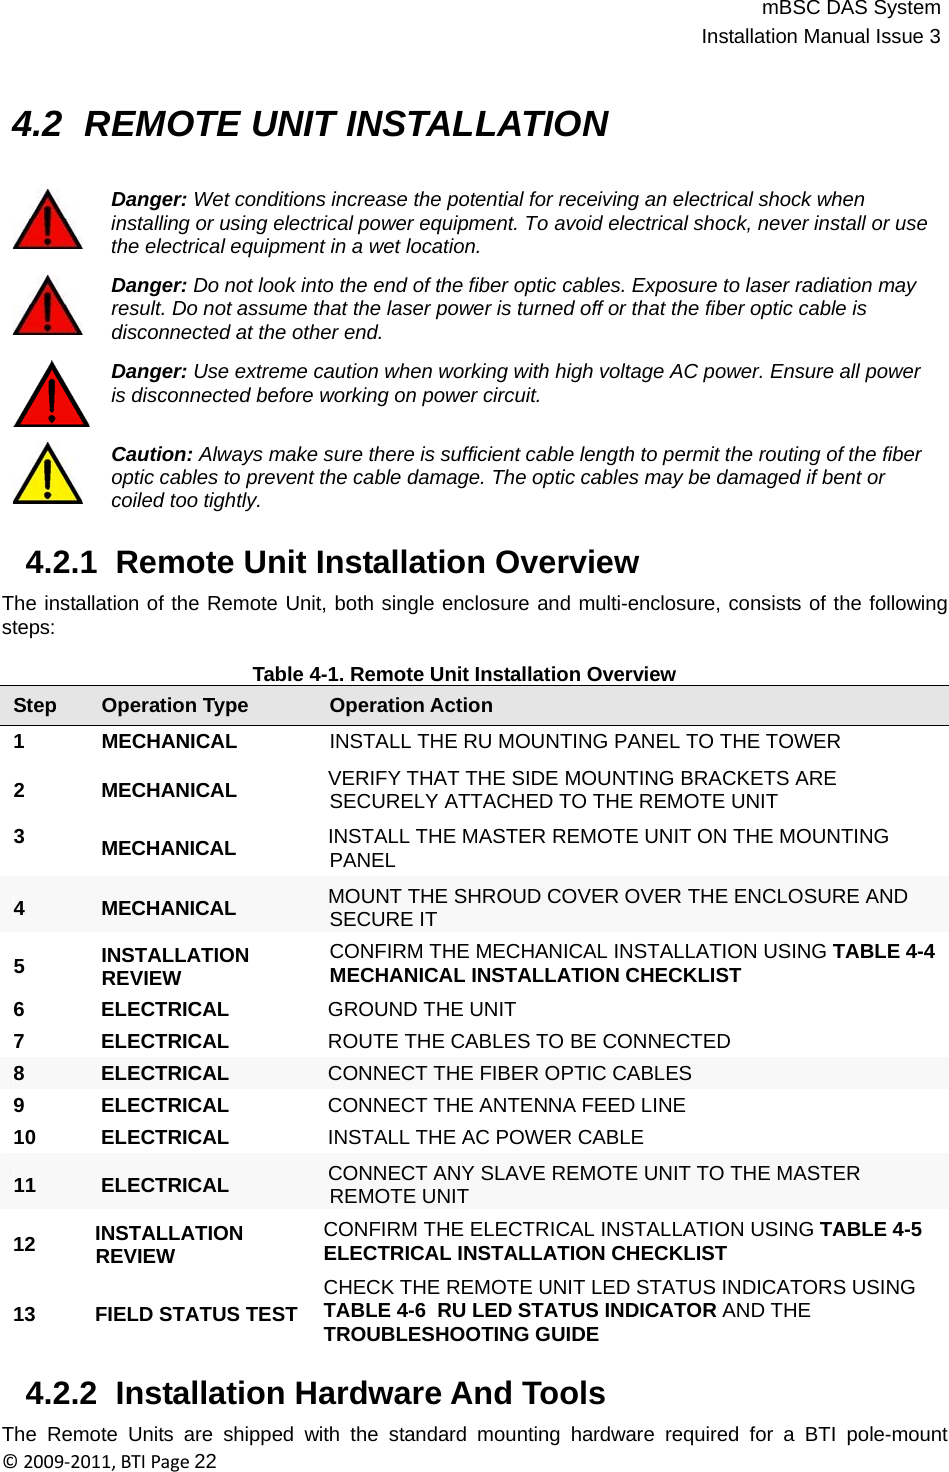 mBSC DAS SystemInstallation Manual Issue 3©2009‐2011,BTIPage22   4.2  REMOTE UNIT INSTALLATION   Danger: Wet conditions increase the potential for receiving an electrical shock when installing or using electrical power equipment. To avoid electrical shock, never install or use the electrical equipment in a wet location.  Danger: Do not look into the end of the fiber optic cables. Exposure to laser radiation may result. Do not assume that the laser power is turned off or that the fiber optic cable is disconnected at the other end.  Danger: Use extreme caution when working with high voltage AC power. Ensure all power is disconnected before working on power circuit.   Caution: Always make sure there is sufficient cable length to permit the routing of the fiber optic cables to prevent the cable damage. The optic cables may be damaged if bent or coiled too tightly.   4.2.1  Remote Unit Installation Overview  The installation of the Remote Unit, both single enclosure and multi-enclosure, consists of the following steps:  Table 4-1. Remote Unit Installation Overview Step Operation Type Operation Action 1 MECHANICAL INSTALL THE RU MOUNTING PANEL TO THE TOWER  2 MECHANICAL  VERIFY THAT THE SIDE MOUNTING BRACKETS ARE SECURELY ATTACHED TO THE REMOTE UNIT  3  MECHANICAL  INSTALL THE MASTER REMOTE UNIT ON THE MOUNTING PANEL  4 MECHANICAL  MOUNT THE SHROUD COVER OVER THE ENCLOSURE AND SECURE IT  5  INSTALLATION REVIEW  CONFIRM THE MECHANICAL INSTALLATION USING TABLE 4-4 MECHANICAL INSTALLATION CHECKLIST 6 ELECTRICAL  GROUND THE UNIT 7 ELECTRICAL  ROUTE THE CABLES TO BE CONNECTED 8 ELECTRICAL  CONNECT THE FIBER OPTIC CABLES 9 ELECTRICAL  CONNECT THE ANTENNA FEED LINE 10 ELECTRICAL  INSTALL THE AC POWER CABLE  11 ELECTRICAL  CONNECT ANY SLAVE REMOTE UNIT TO THE MASTER REMOTE UNIT  12  INSTALLATION REVIEW   13 FIELD STATUS TEST  CONFIRM THE ELECTRICAL INSTALLATION USING TABLE 4-5 ELECTRICAL INSTALLATION CHECKLIST  CHECK THE REMOTE UNIT LED STATUS INDICATORS USING TABLE 4-6  RU LED STATUS INDICATOR AND THE TROUBLESHOOTING GUIDE   4.2.2  Installation Hardware And Tools  The Remote Units are shipped with the standard mounting hardware required for a BTI pole-mount 